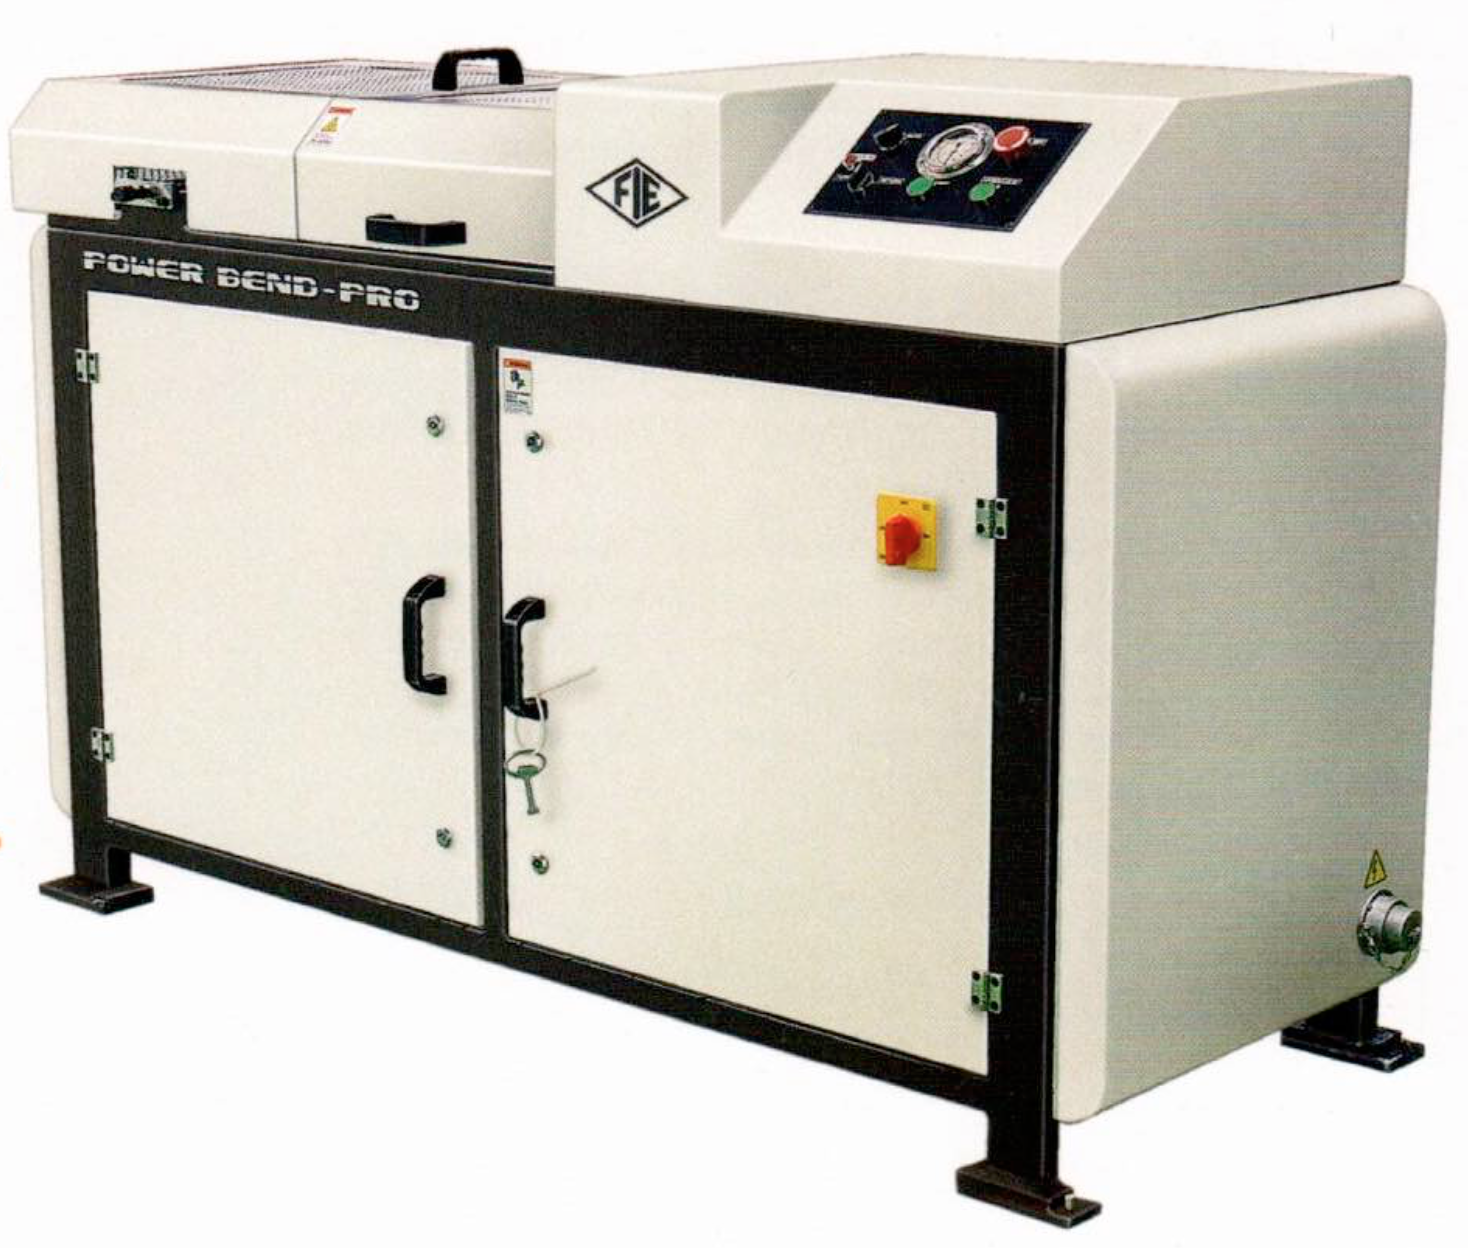 Material testing machines service providers